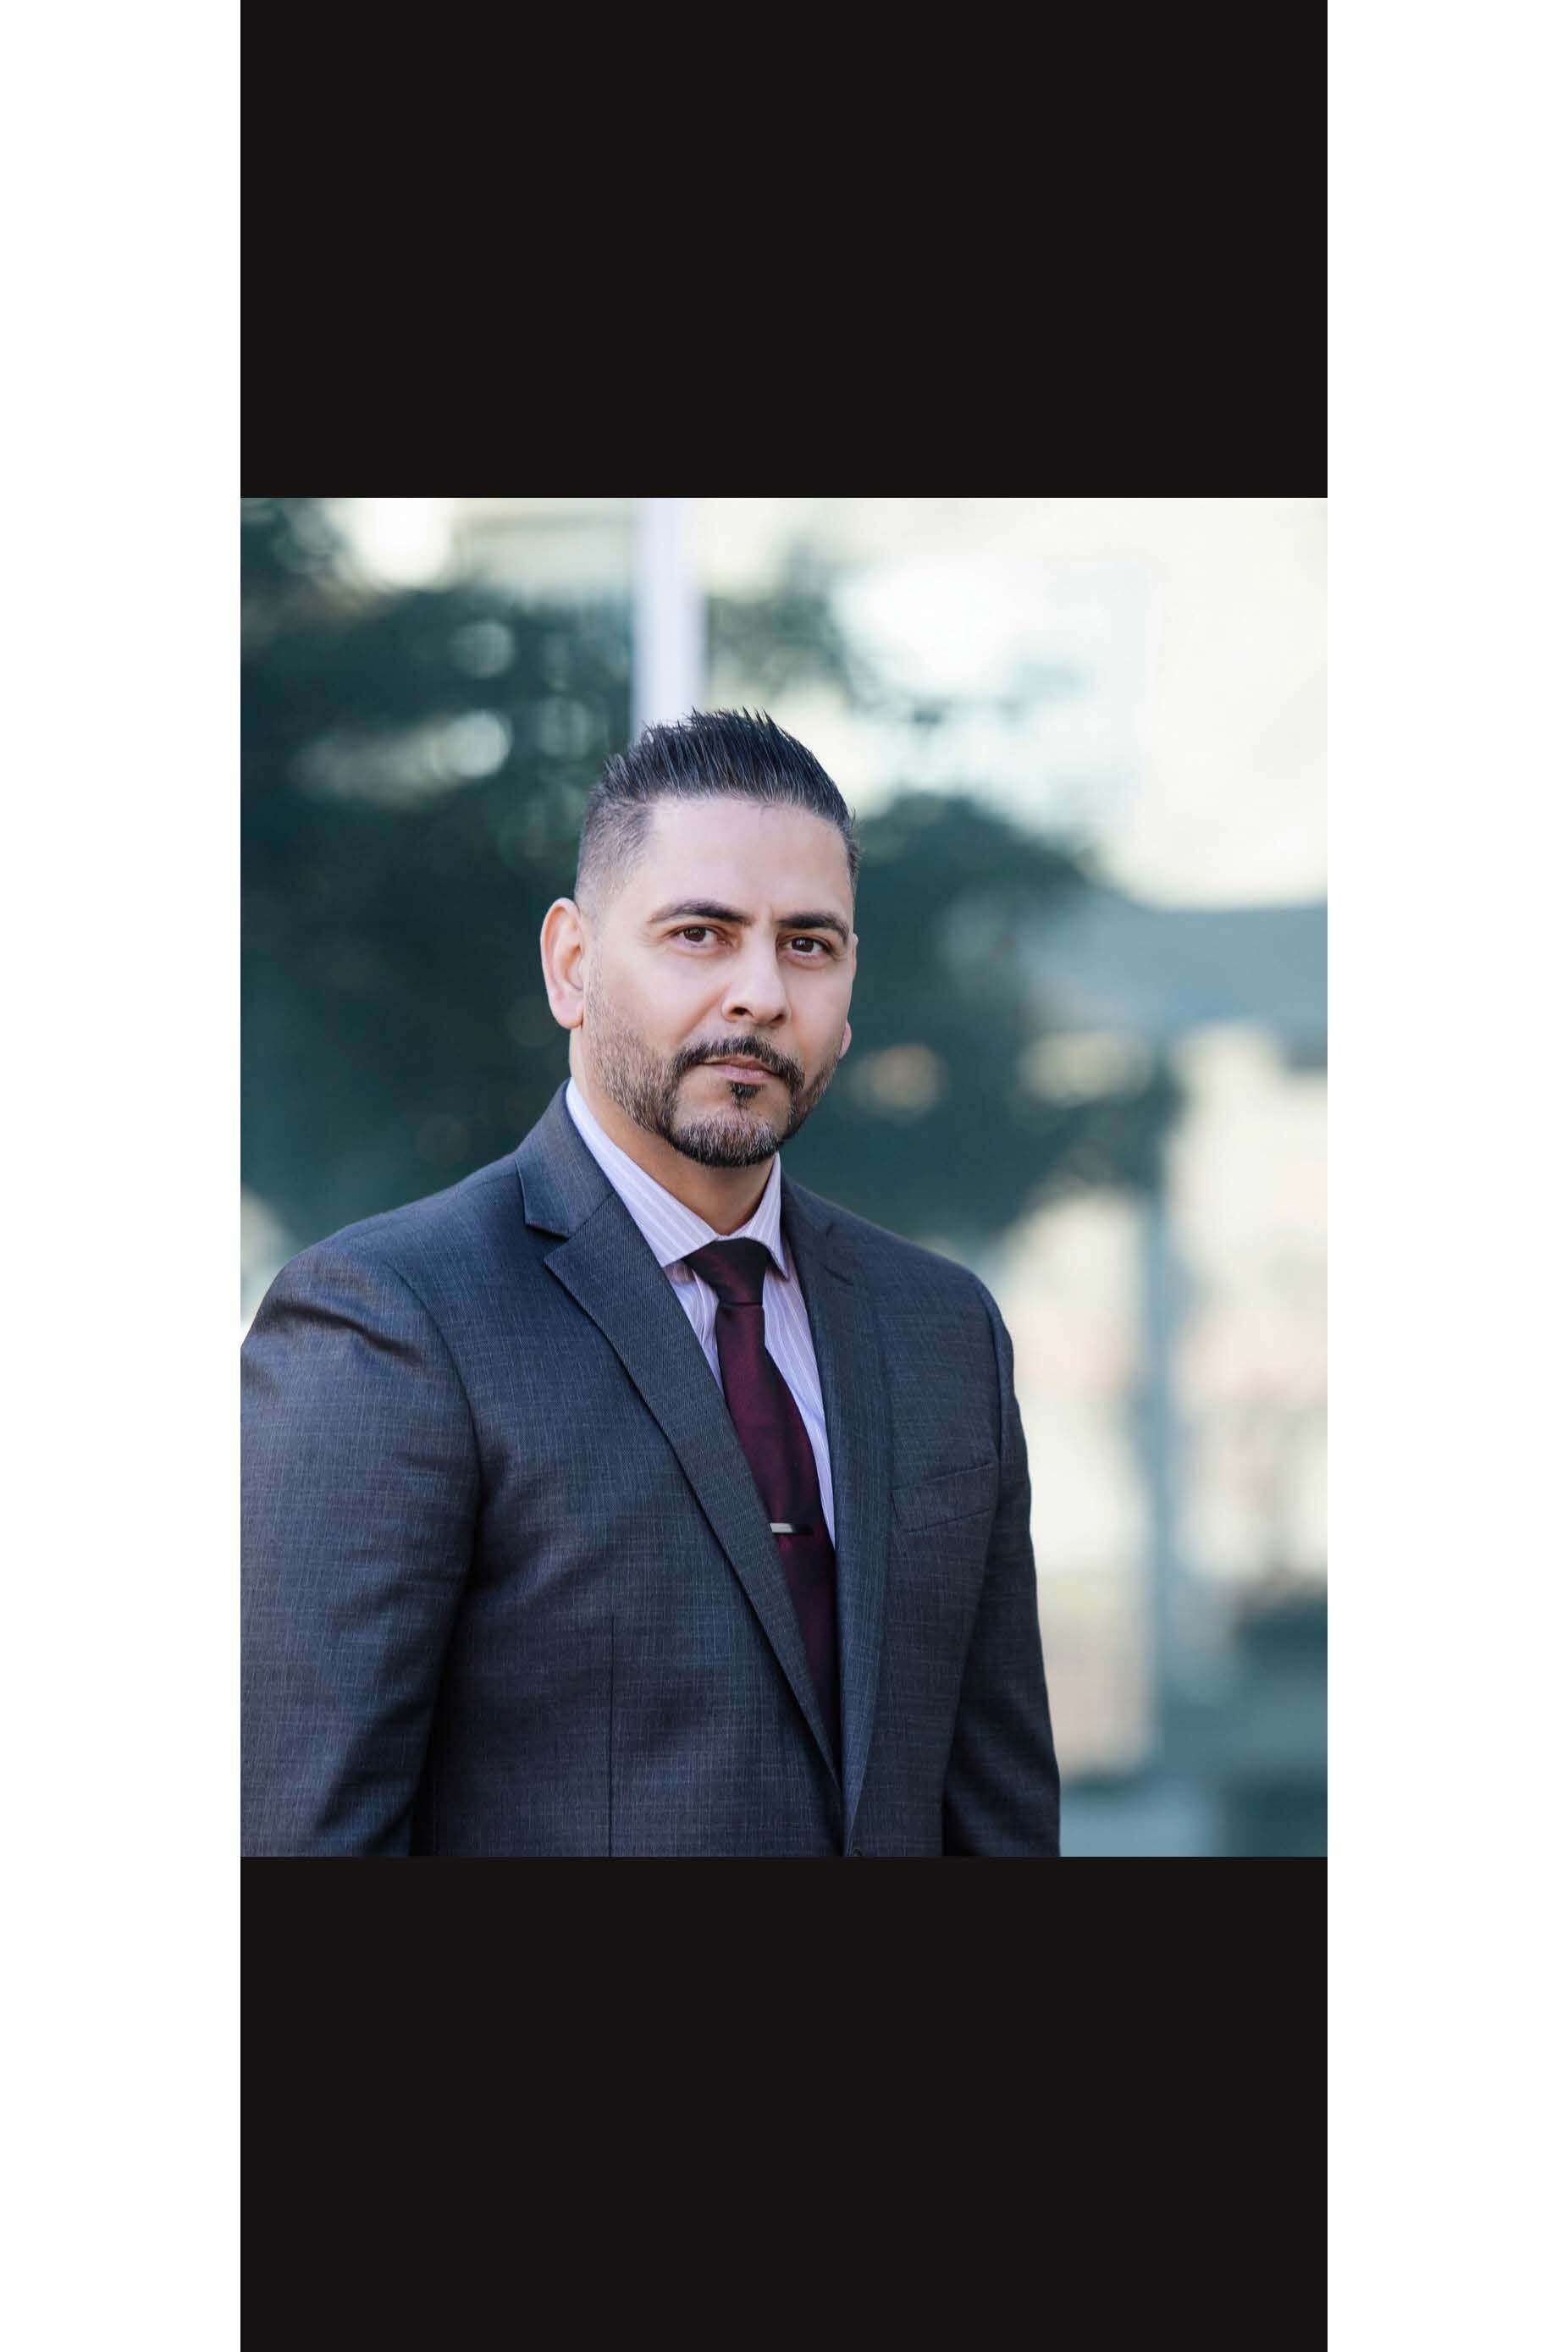 Yousef Walizada, Real Estate Salesperson in Castro Valley, Real Estate Alliance